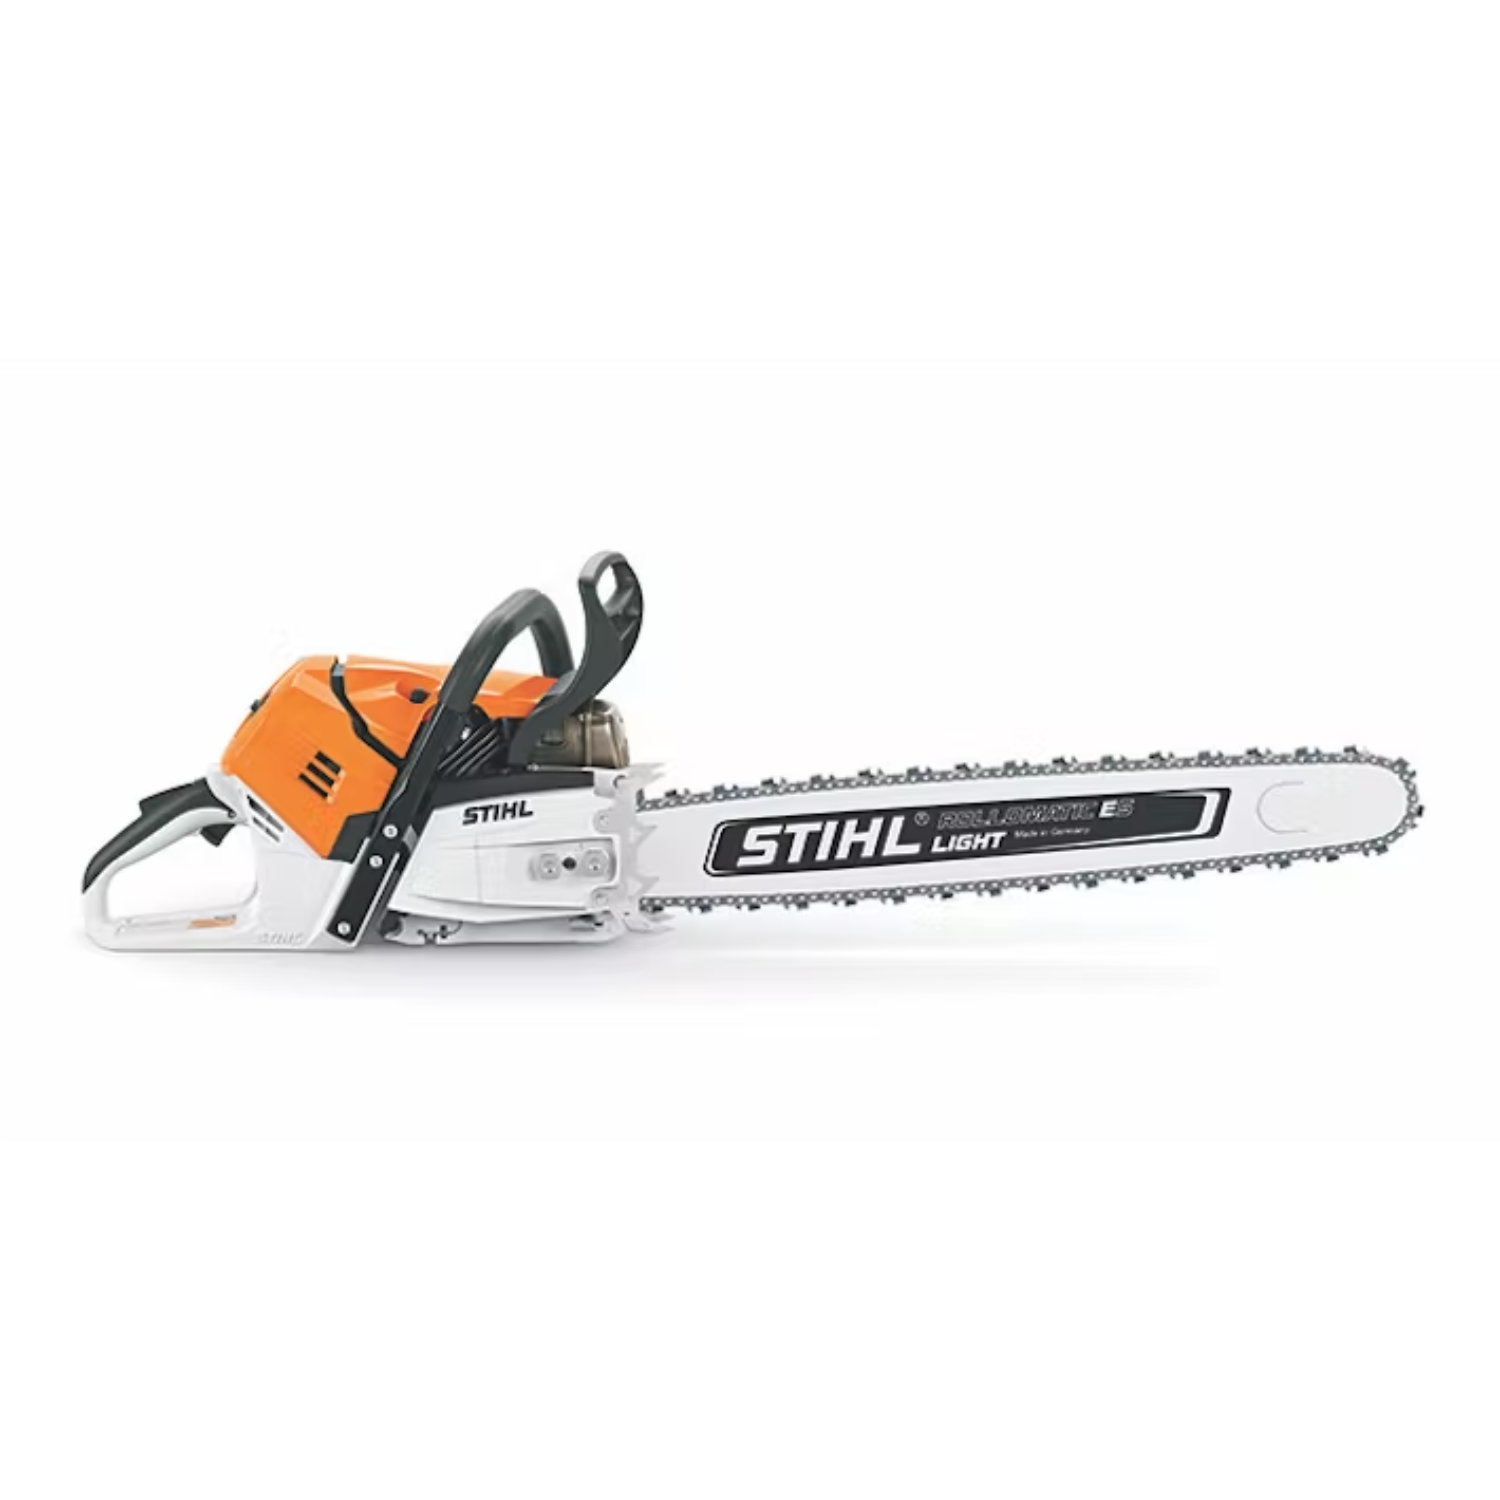 Stihl TS 500i Cutquik Gas Powered Cut Off Saw with Fuel Injection